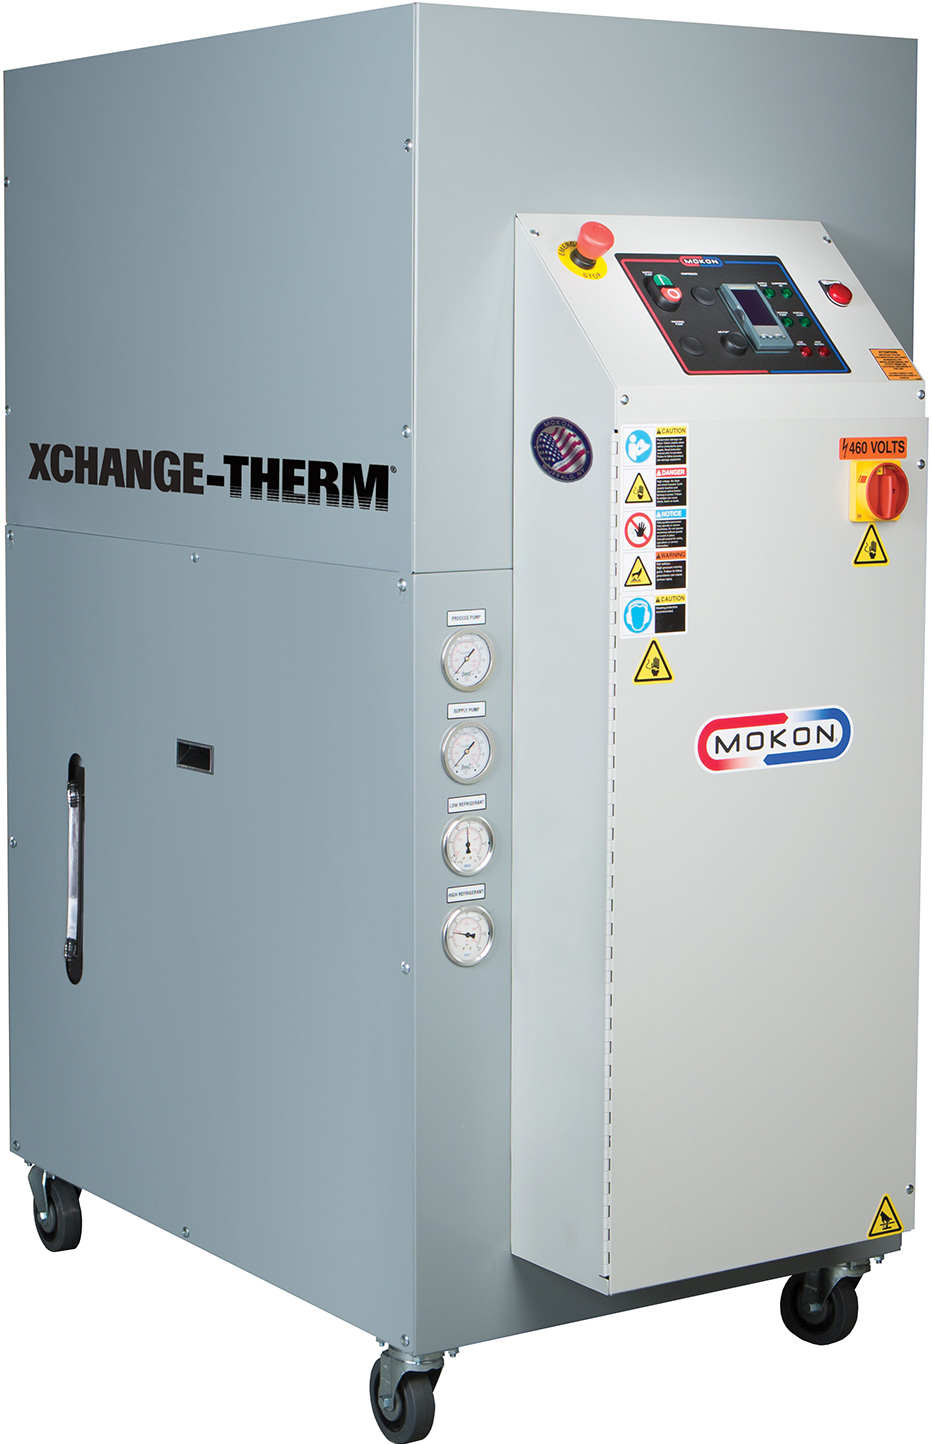 Xchange-Therm Heating and Chilling System